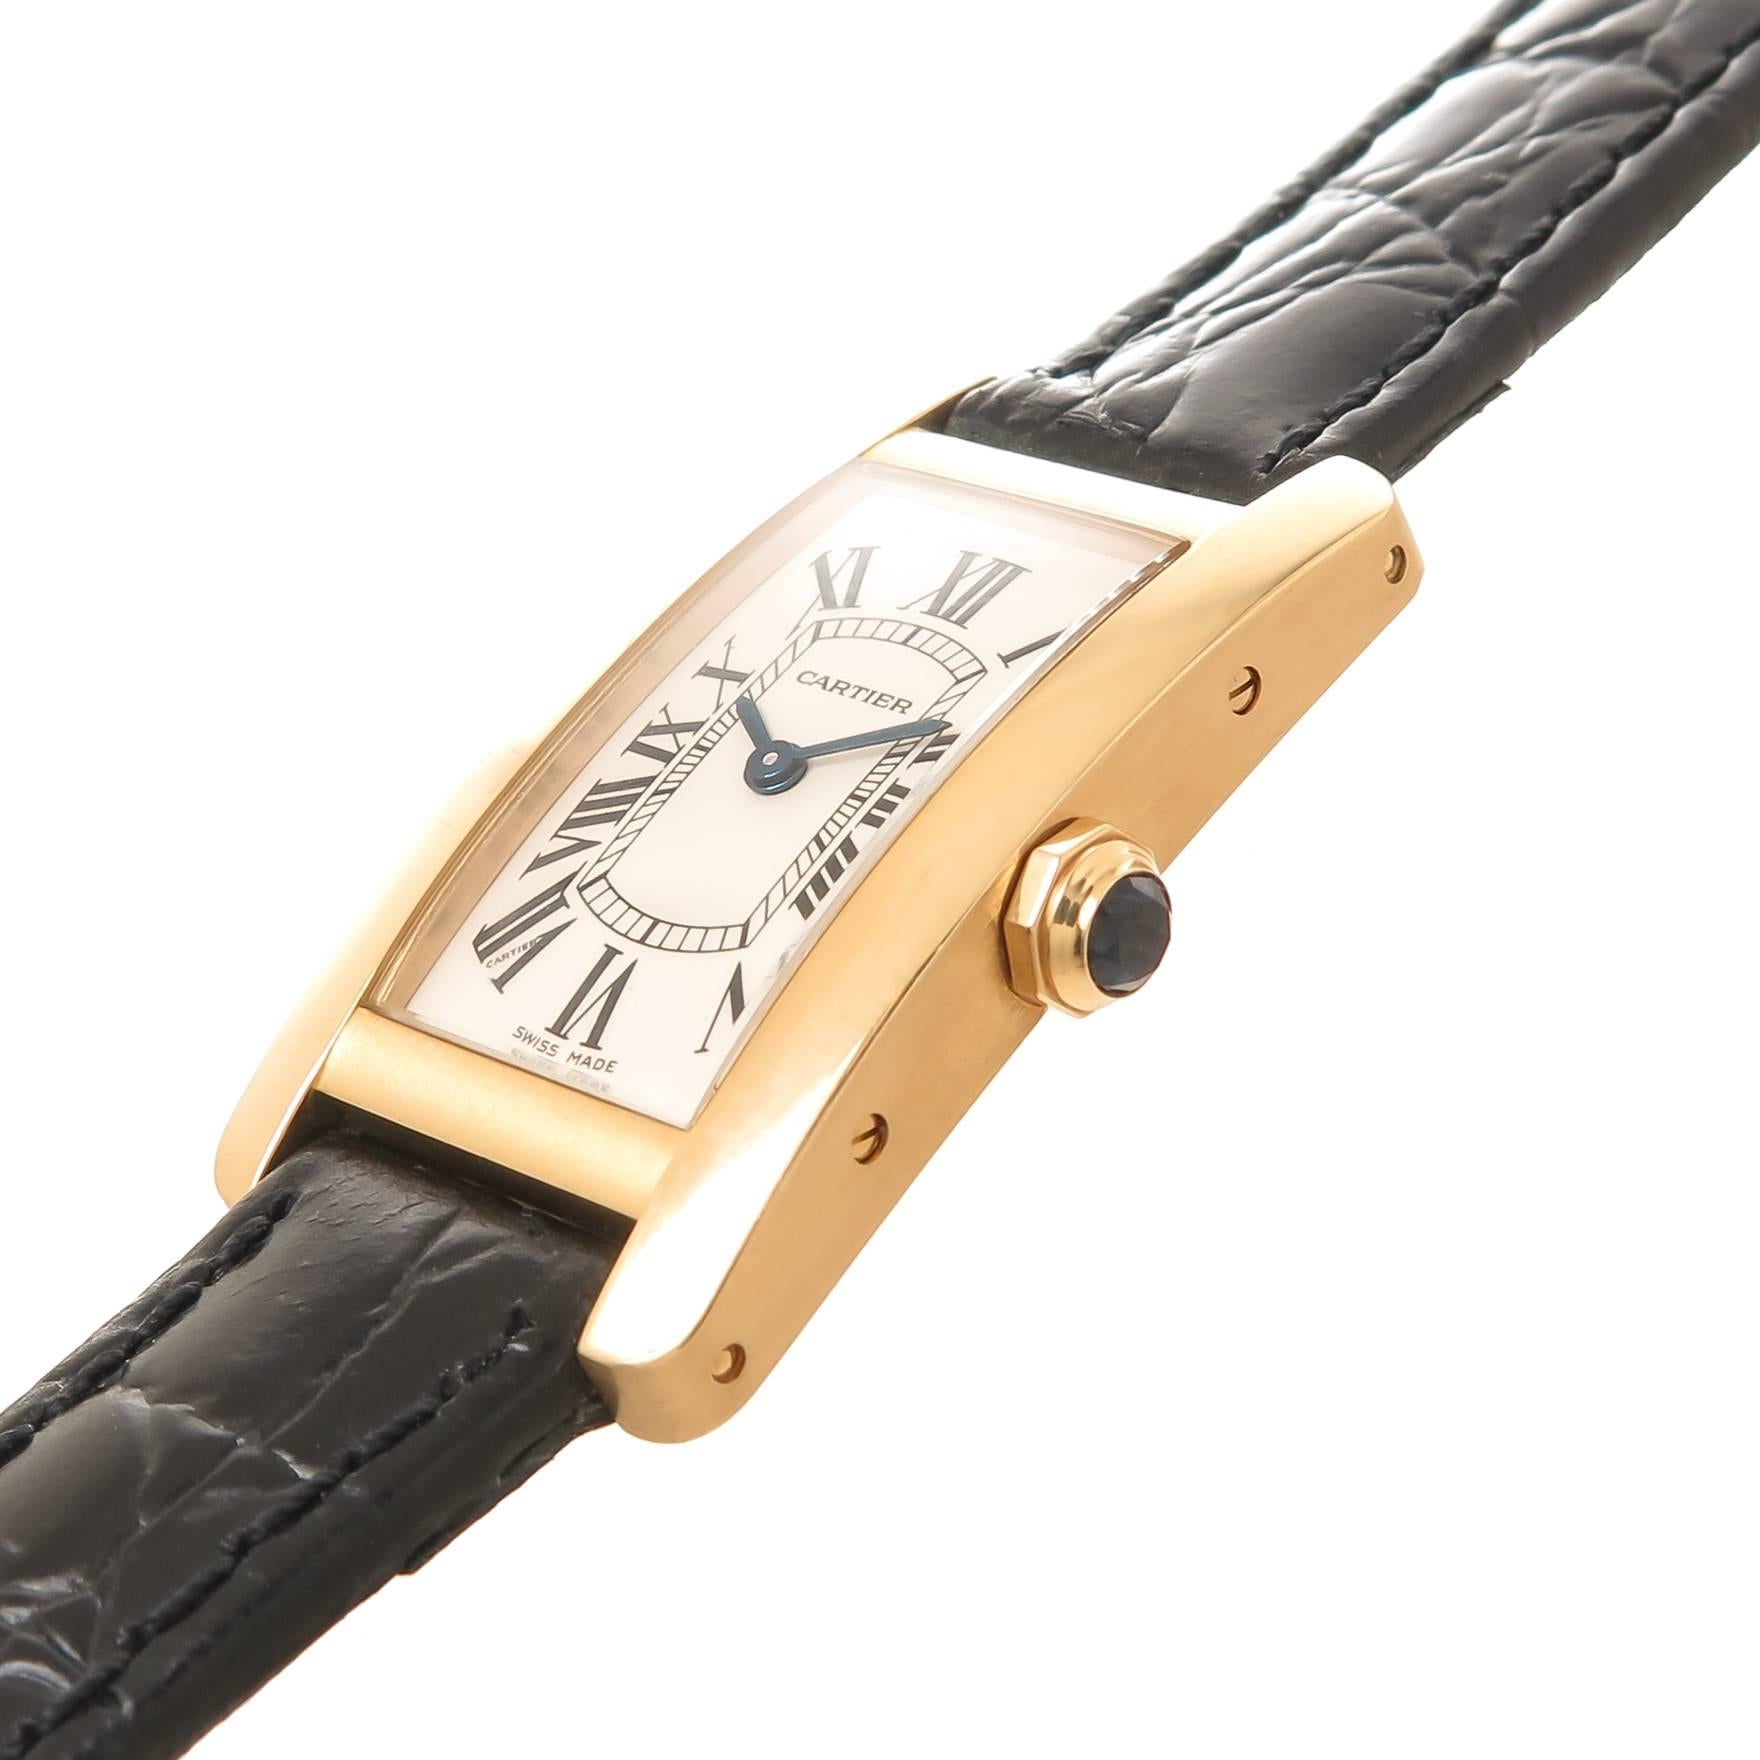 Circa 2000 Cartier Tank American ladies wrist watch,  34 X 19 MM 18K Yellow Gold water resistant case. Quartz Movement, White dial with Black Roman Numerals, Sapphire Crown. New Hadley Roma Black textured leather strap with original Cartier Yellow